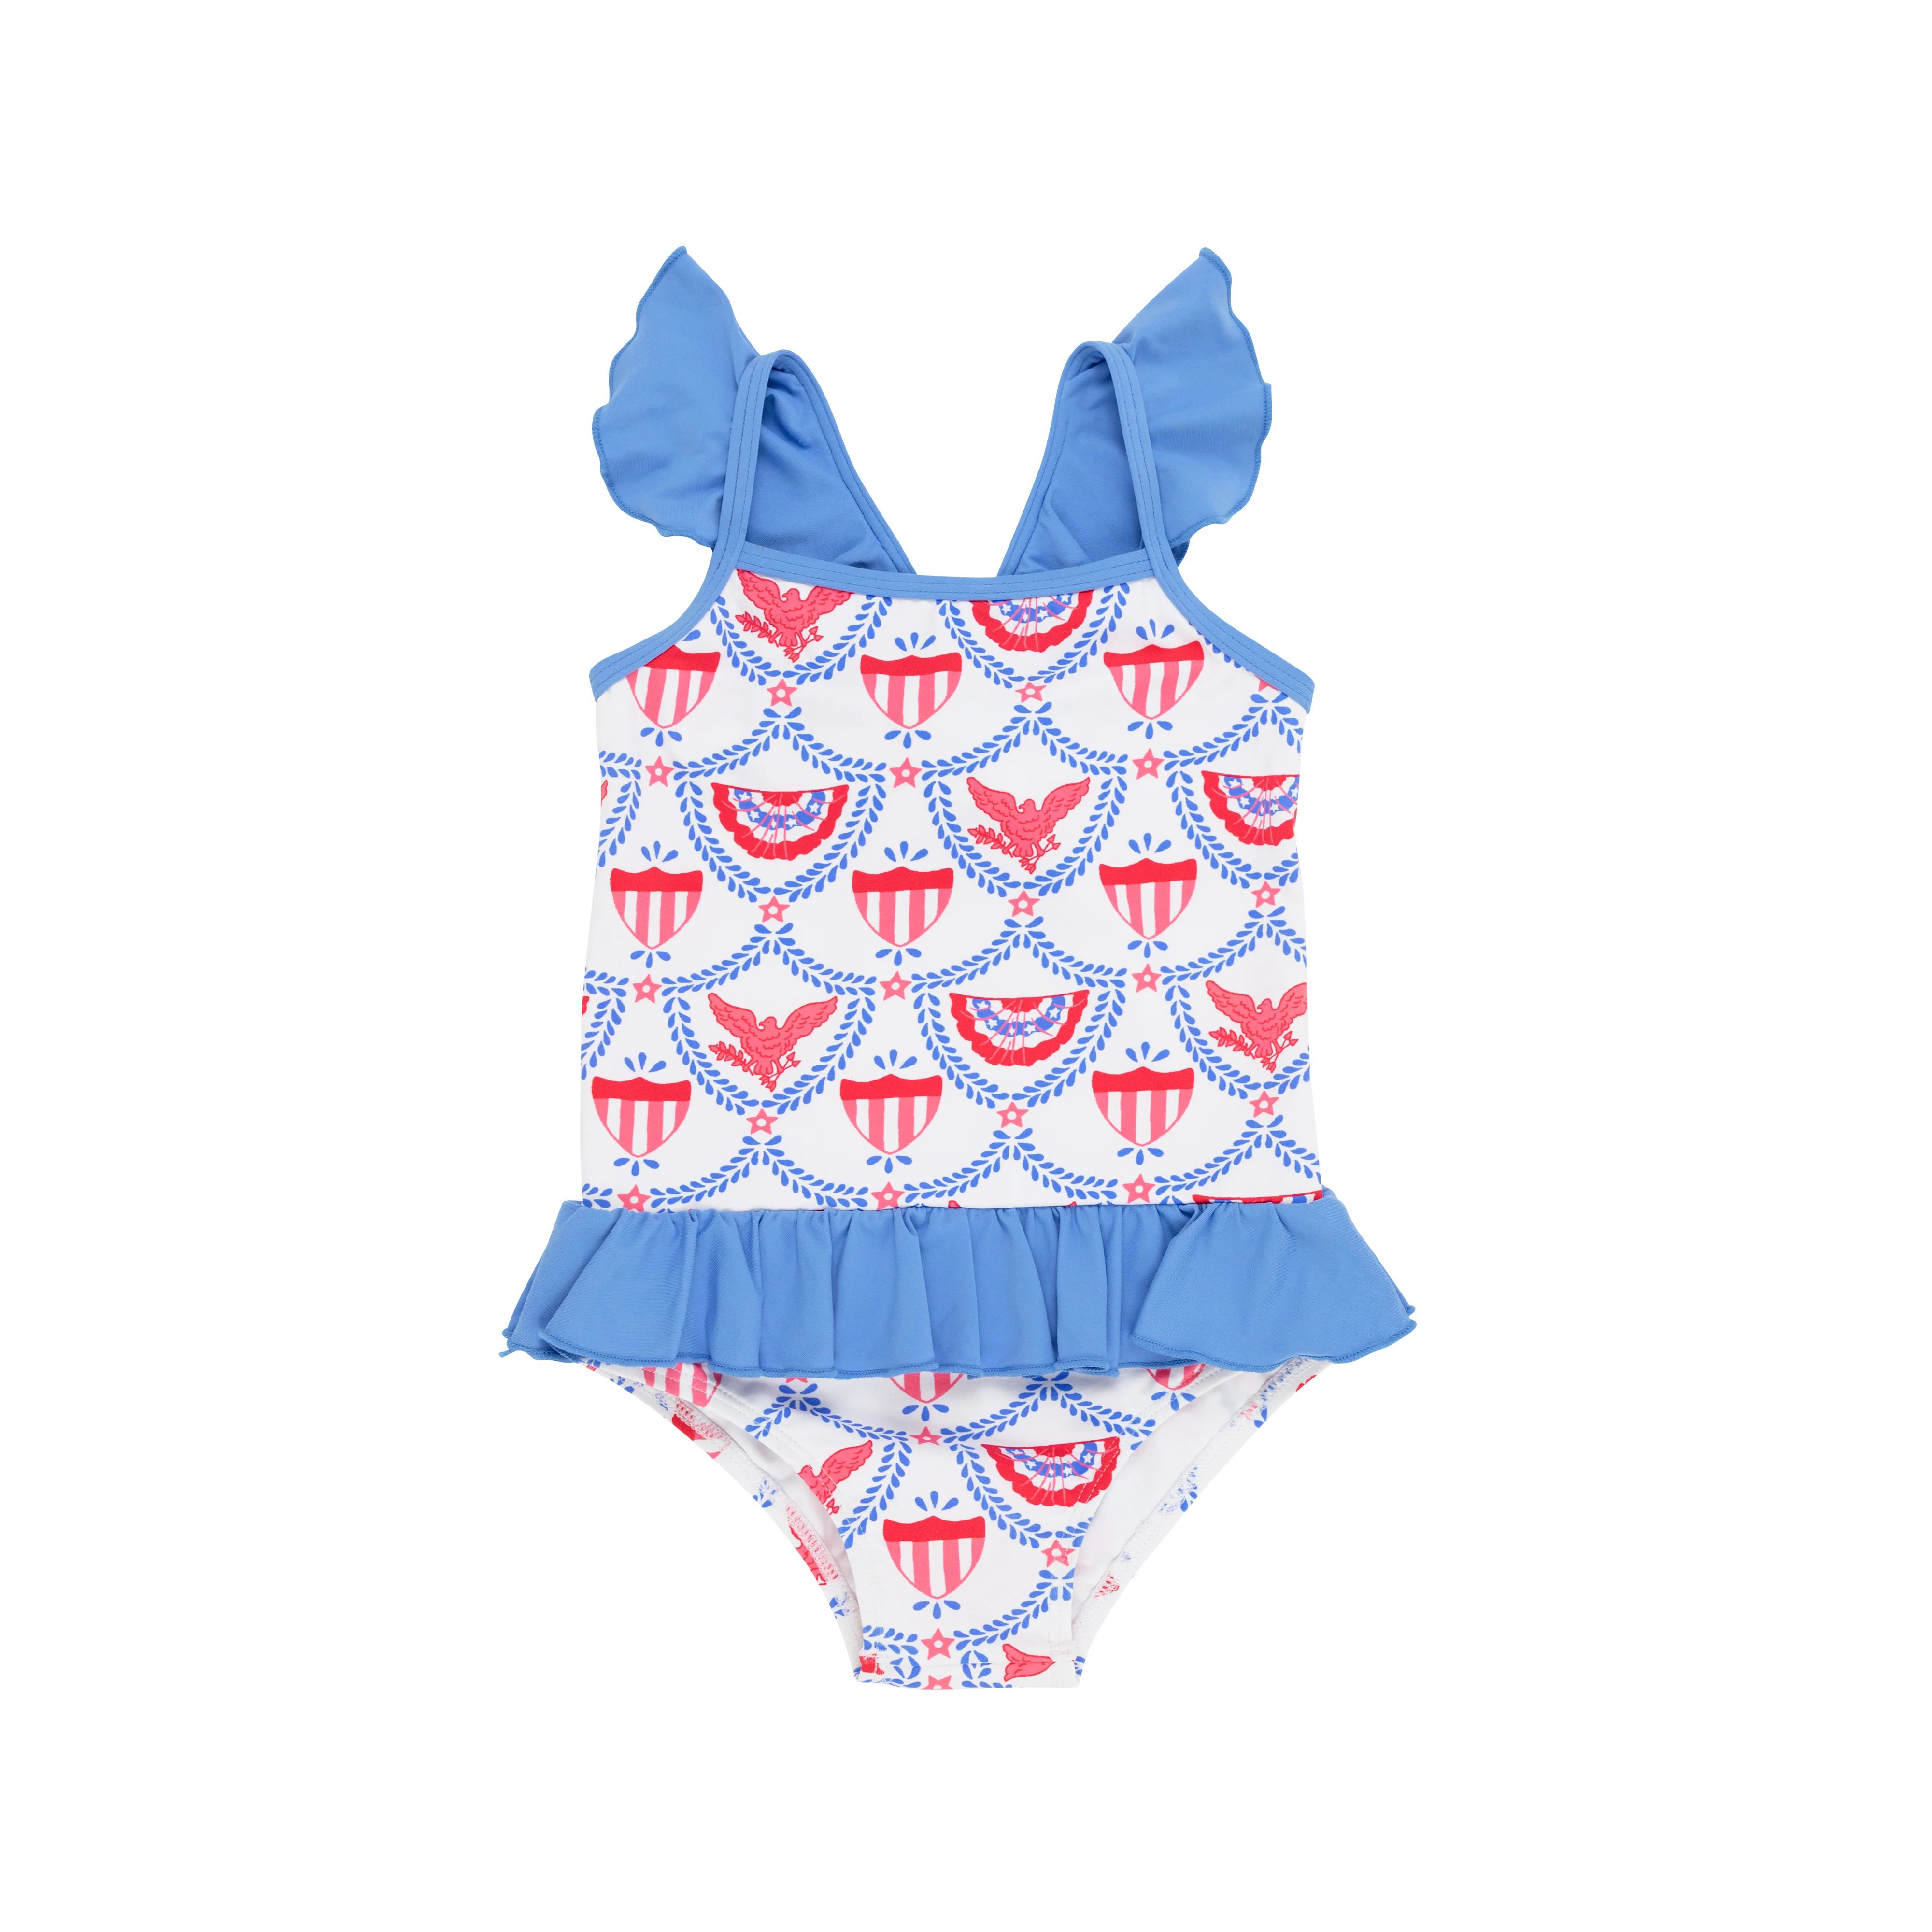 St. Lucia Swimsuit - American Swag with Barbados Blue | The Beaufort Bonnet Company